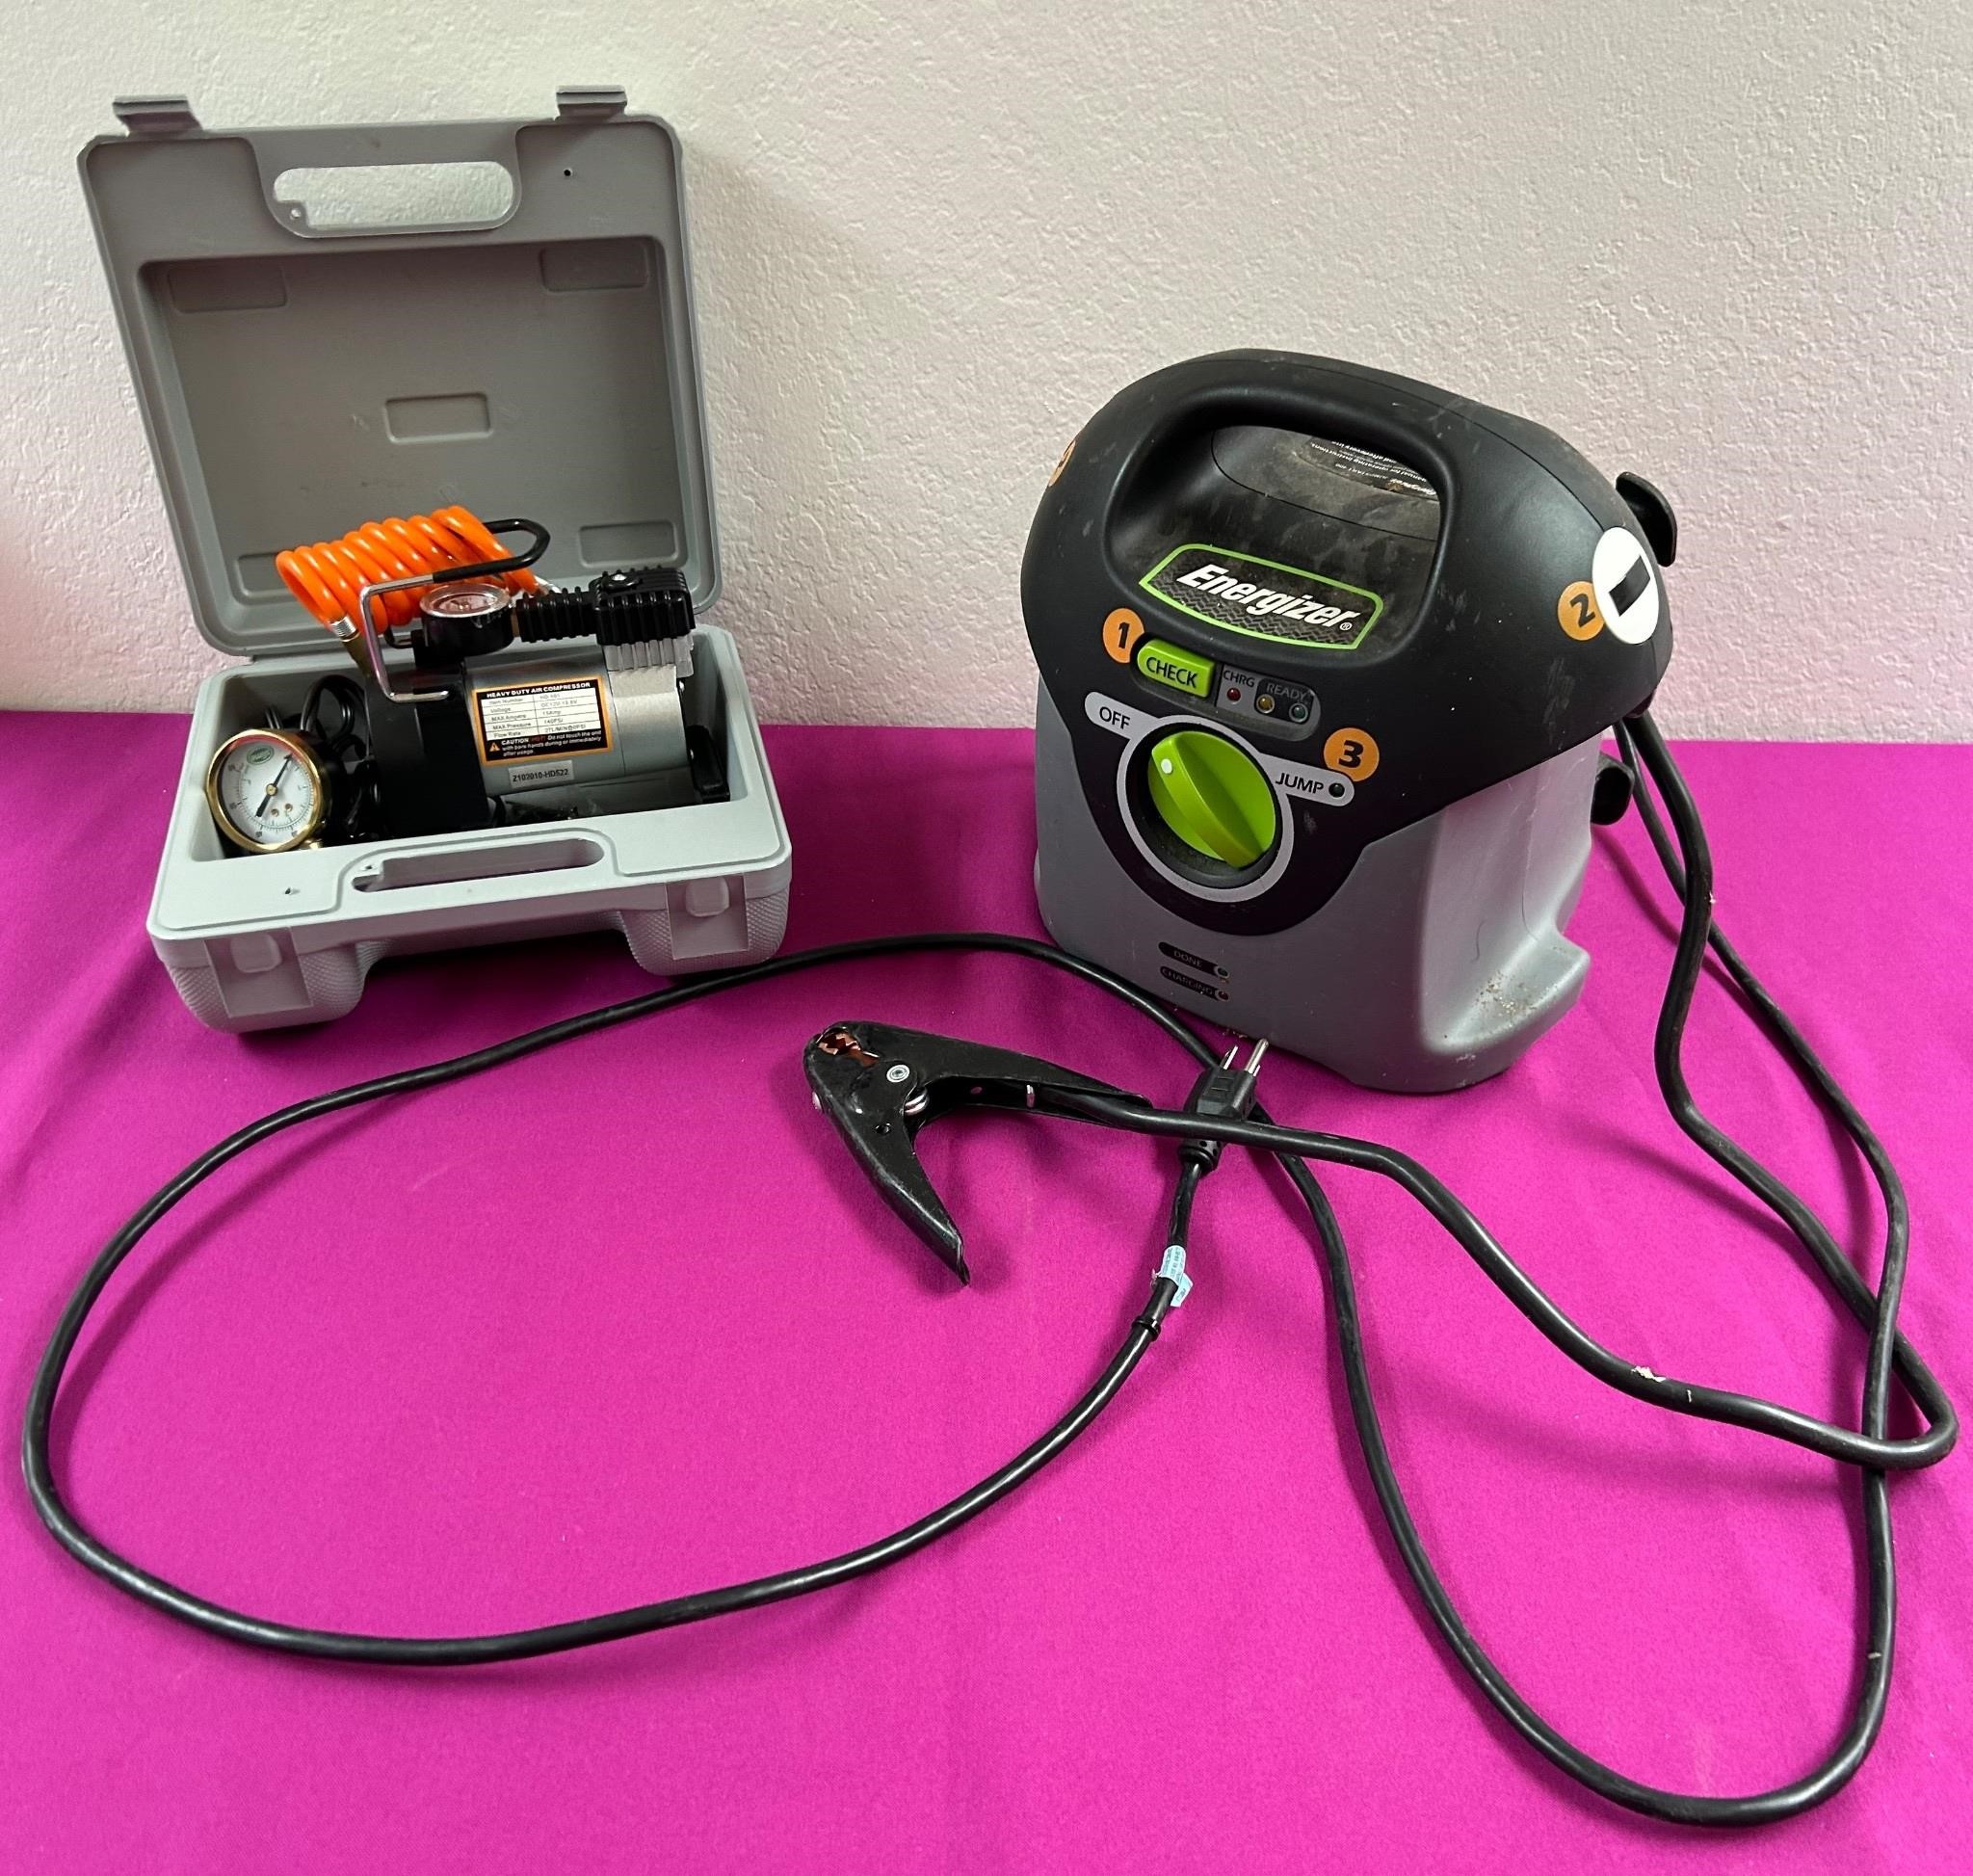 Energizer Battery Check / Charger, Air Compressor